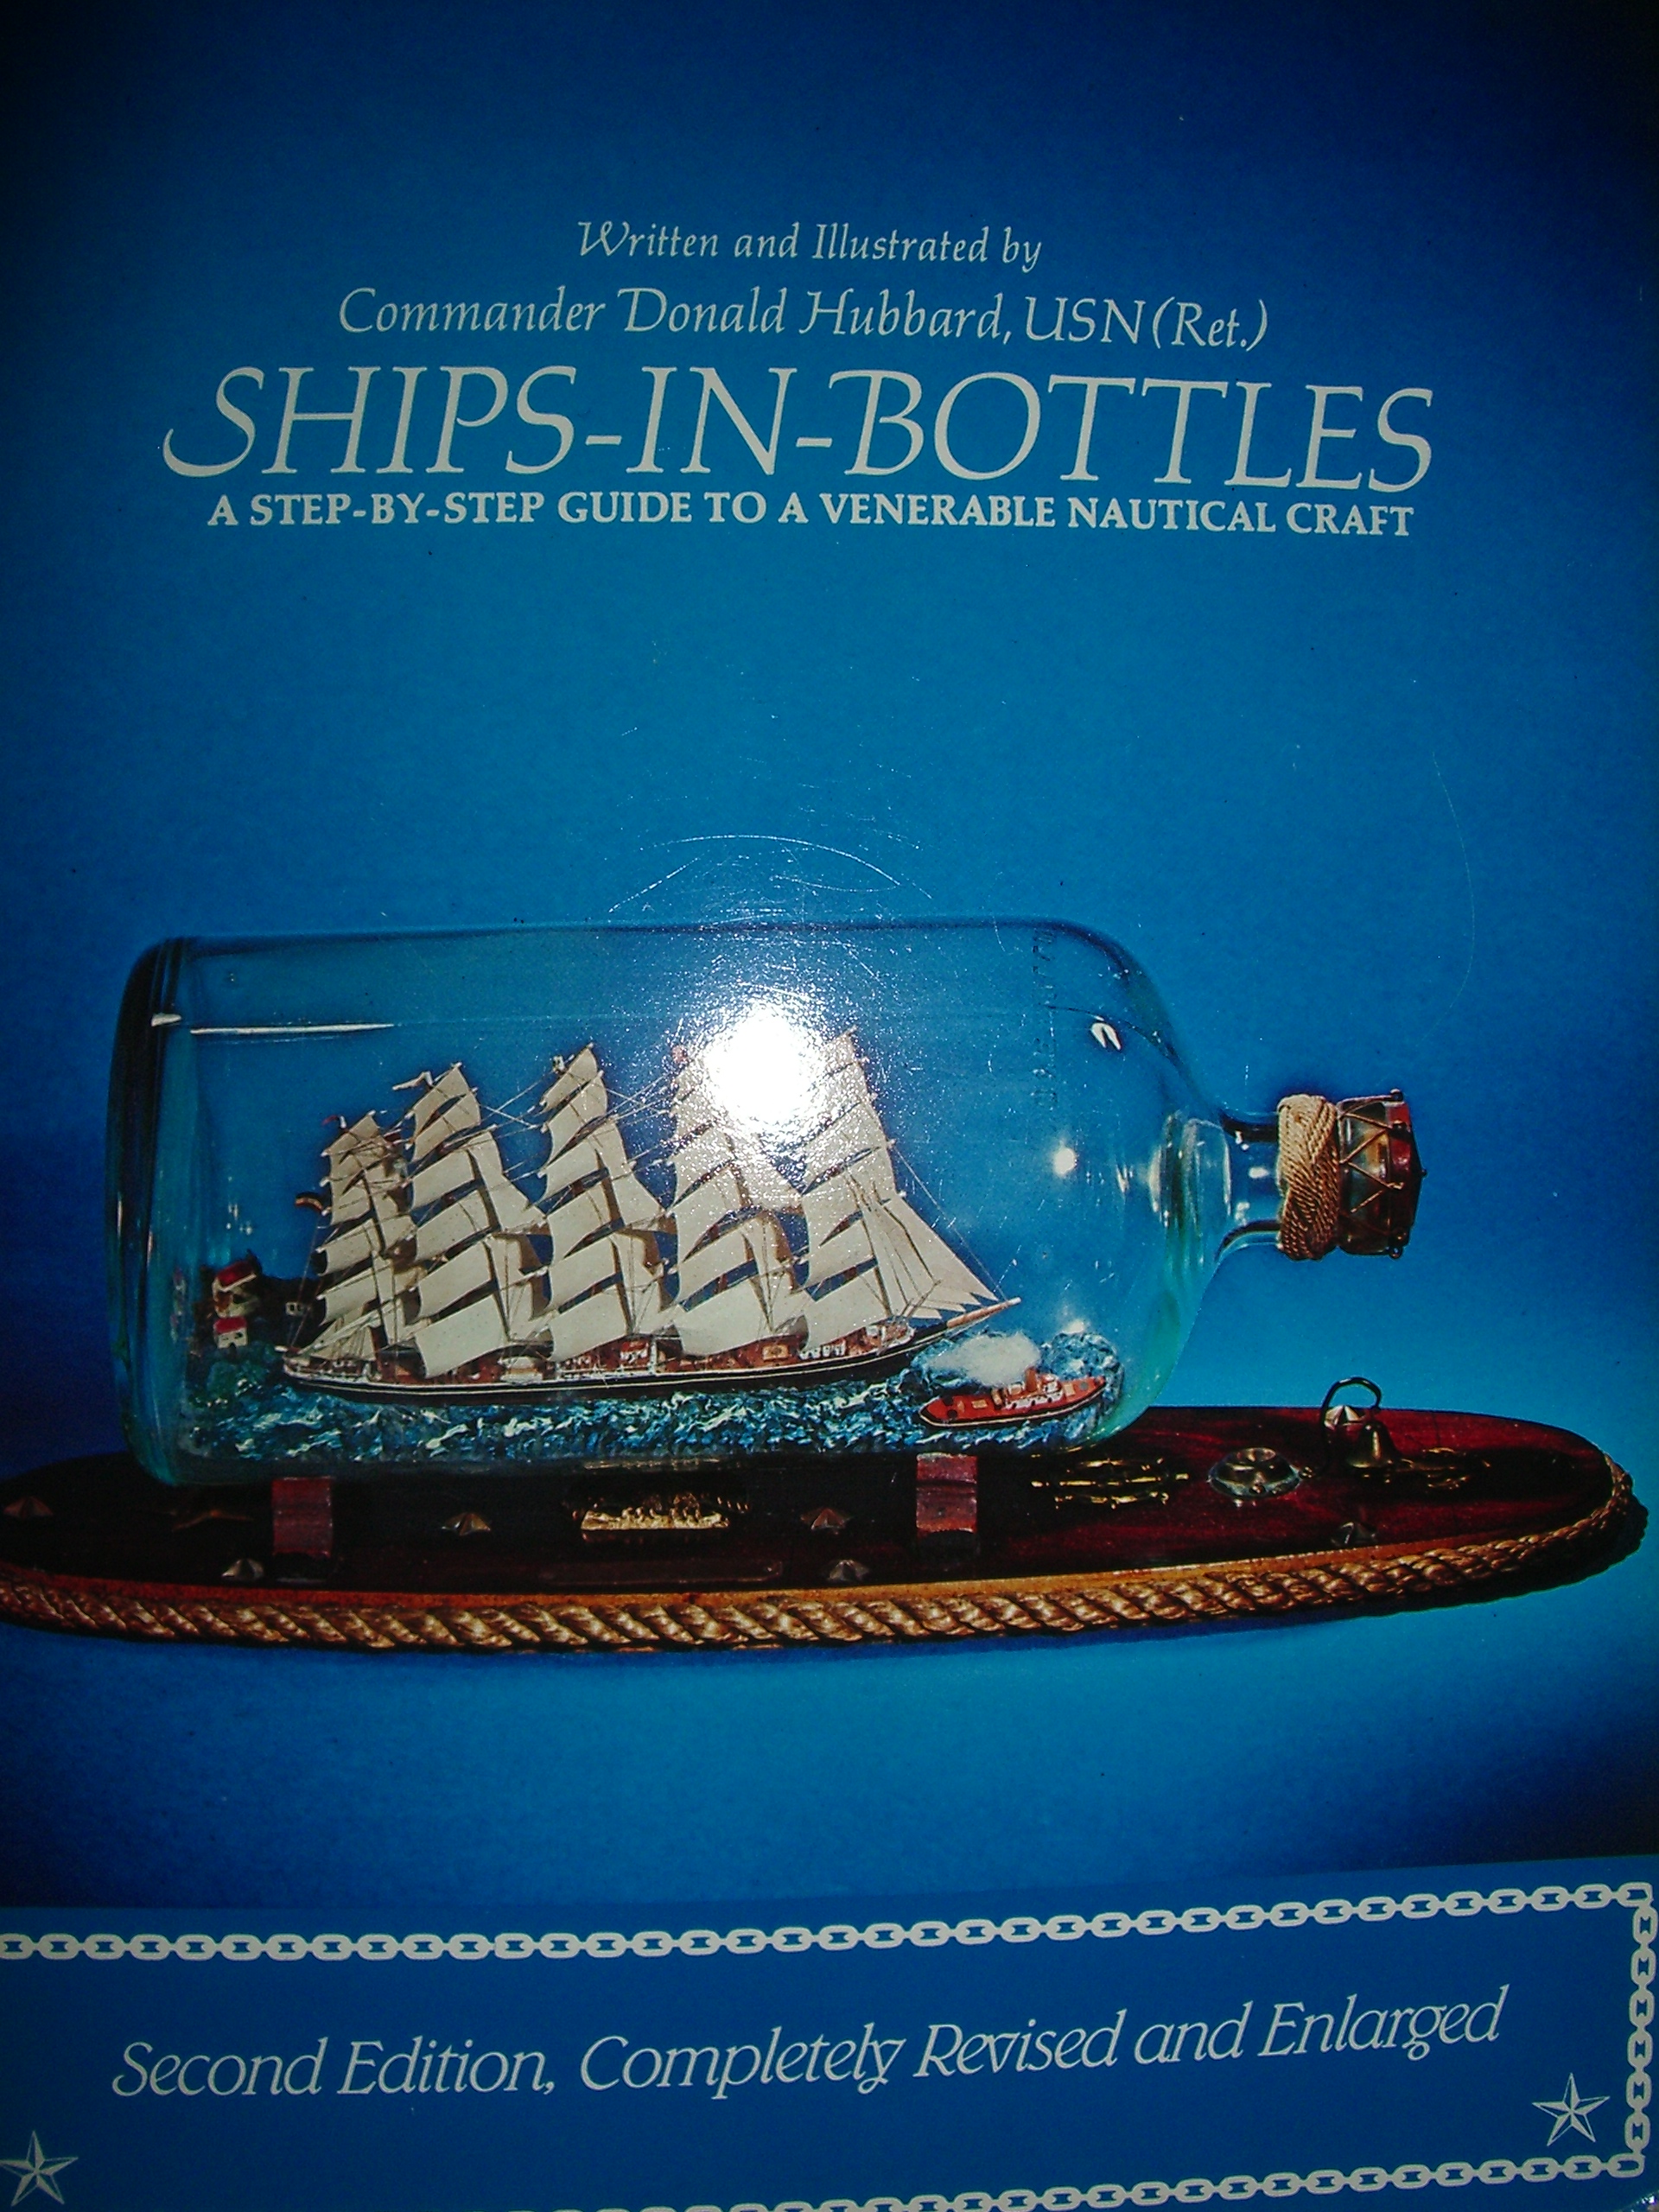 ShipsinBottles. A stepbystep guide to a venerable nautical craft